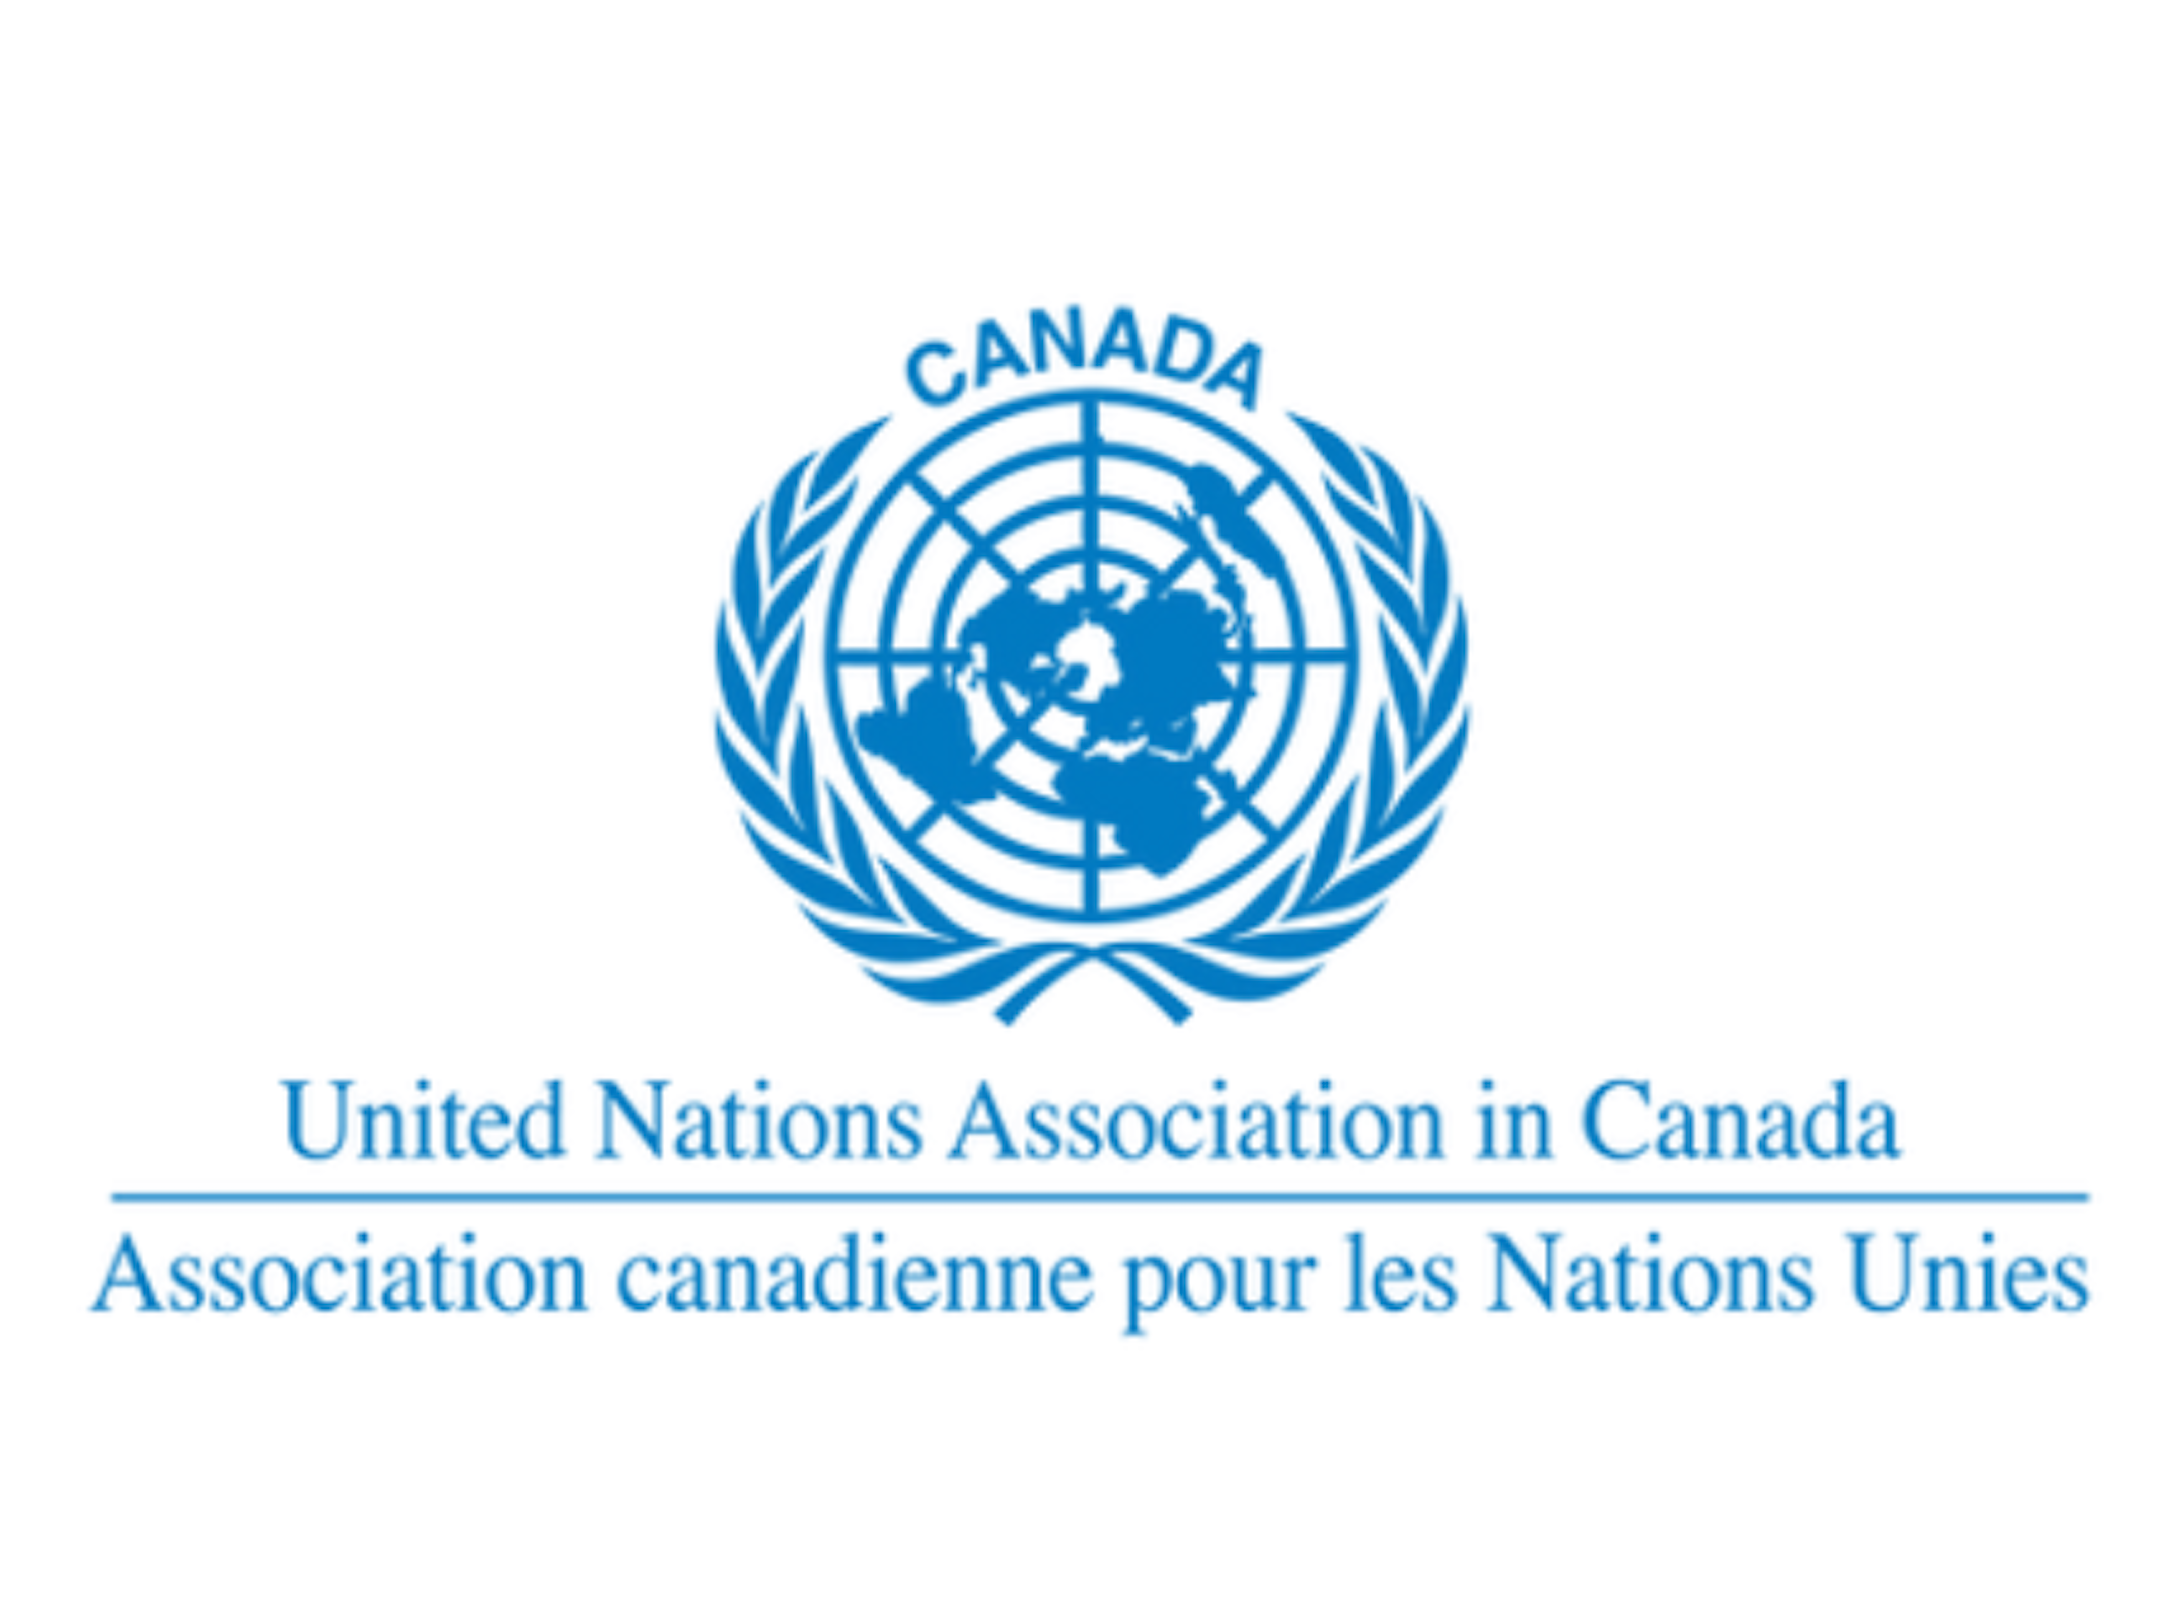 United Nations Association in Canada